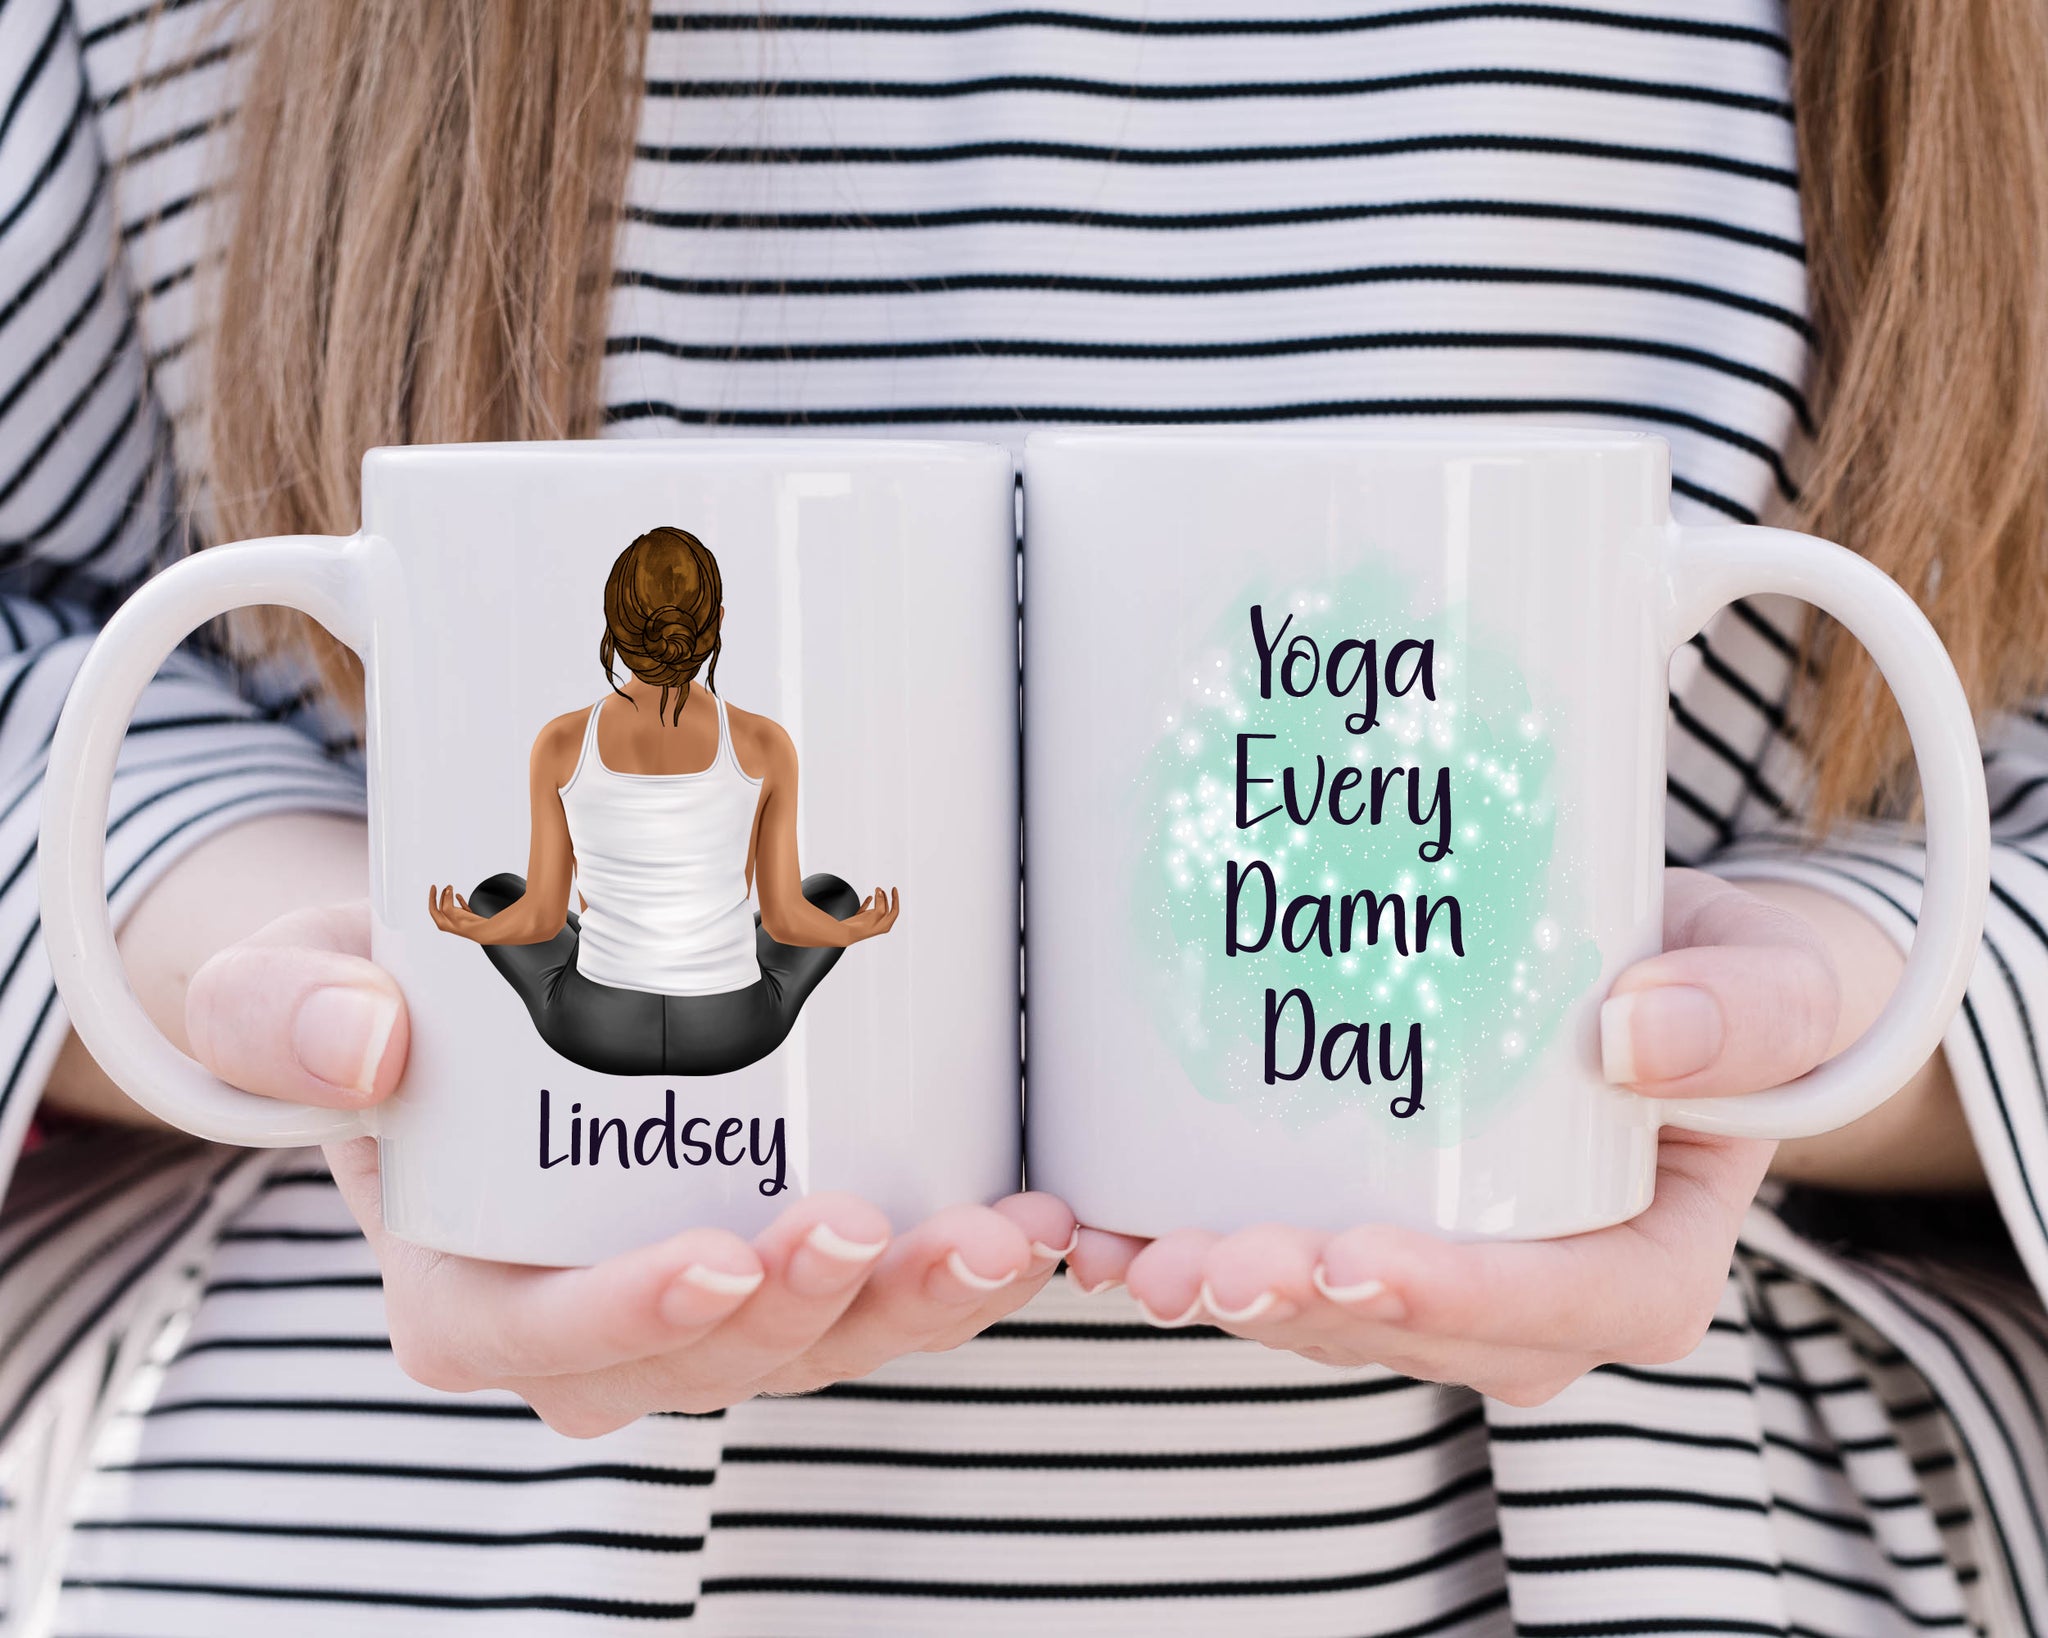 How To: Yoga Coffee Mug - Learn Yoga Poses While You Drink Your Coffee -  Includes a Yoga Mat Coaster and Comes in a Fun Gift Box